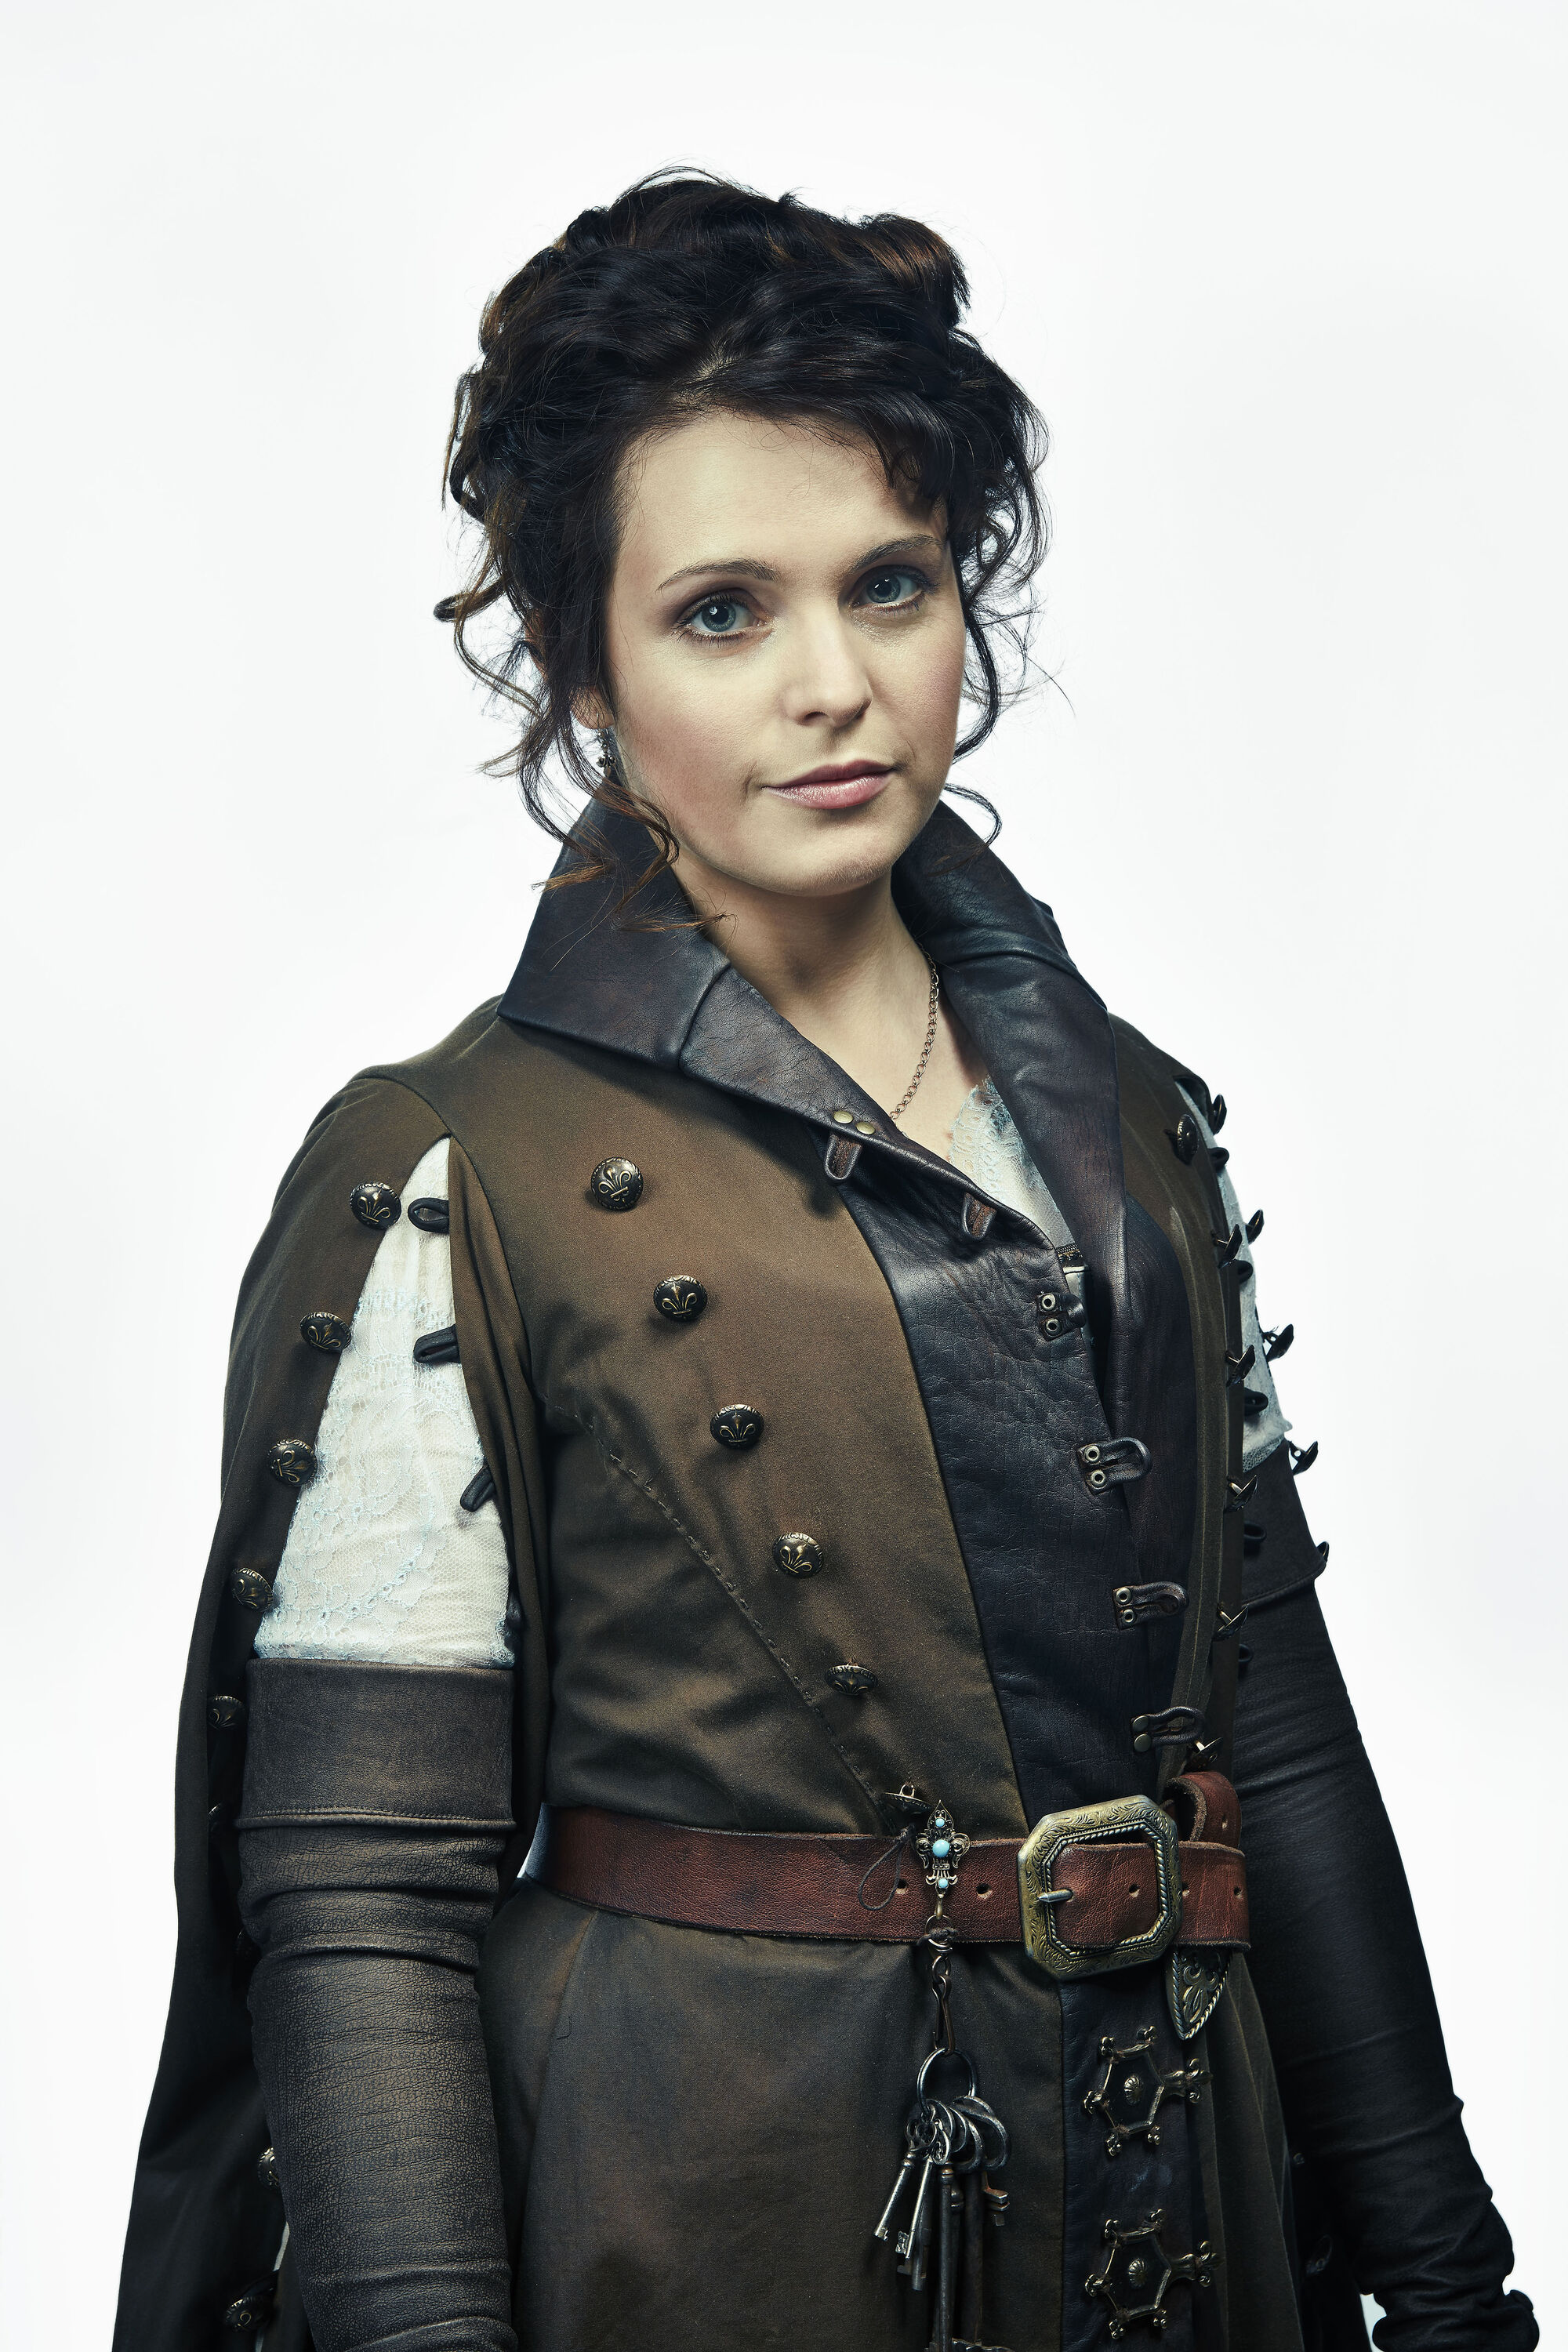 Constance d'Artagnan | Wikia The Musketeers | FANDOM powered by Wikia